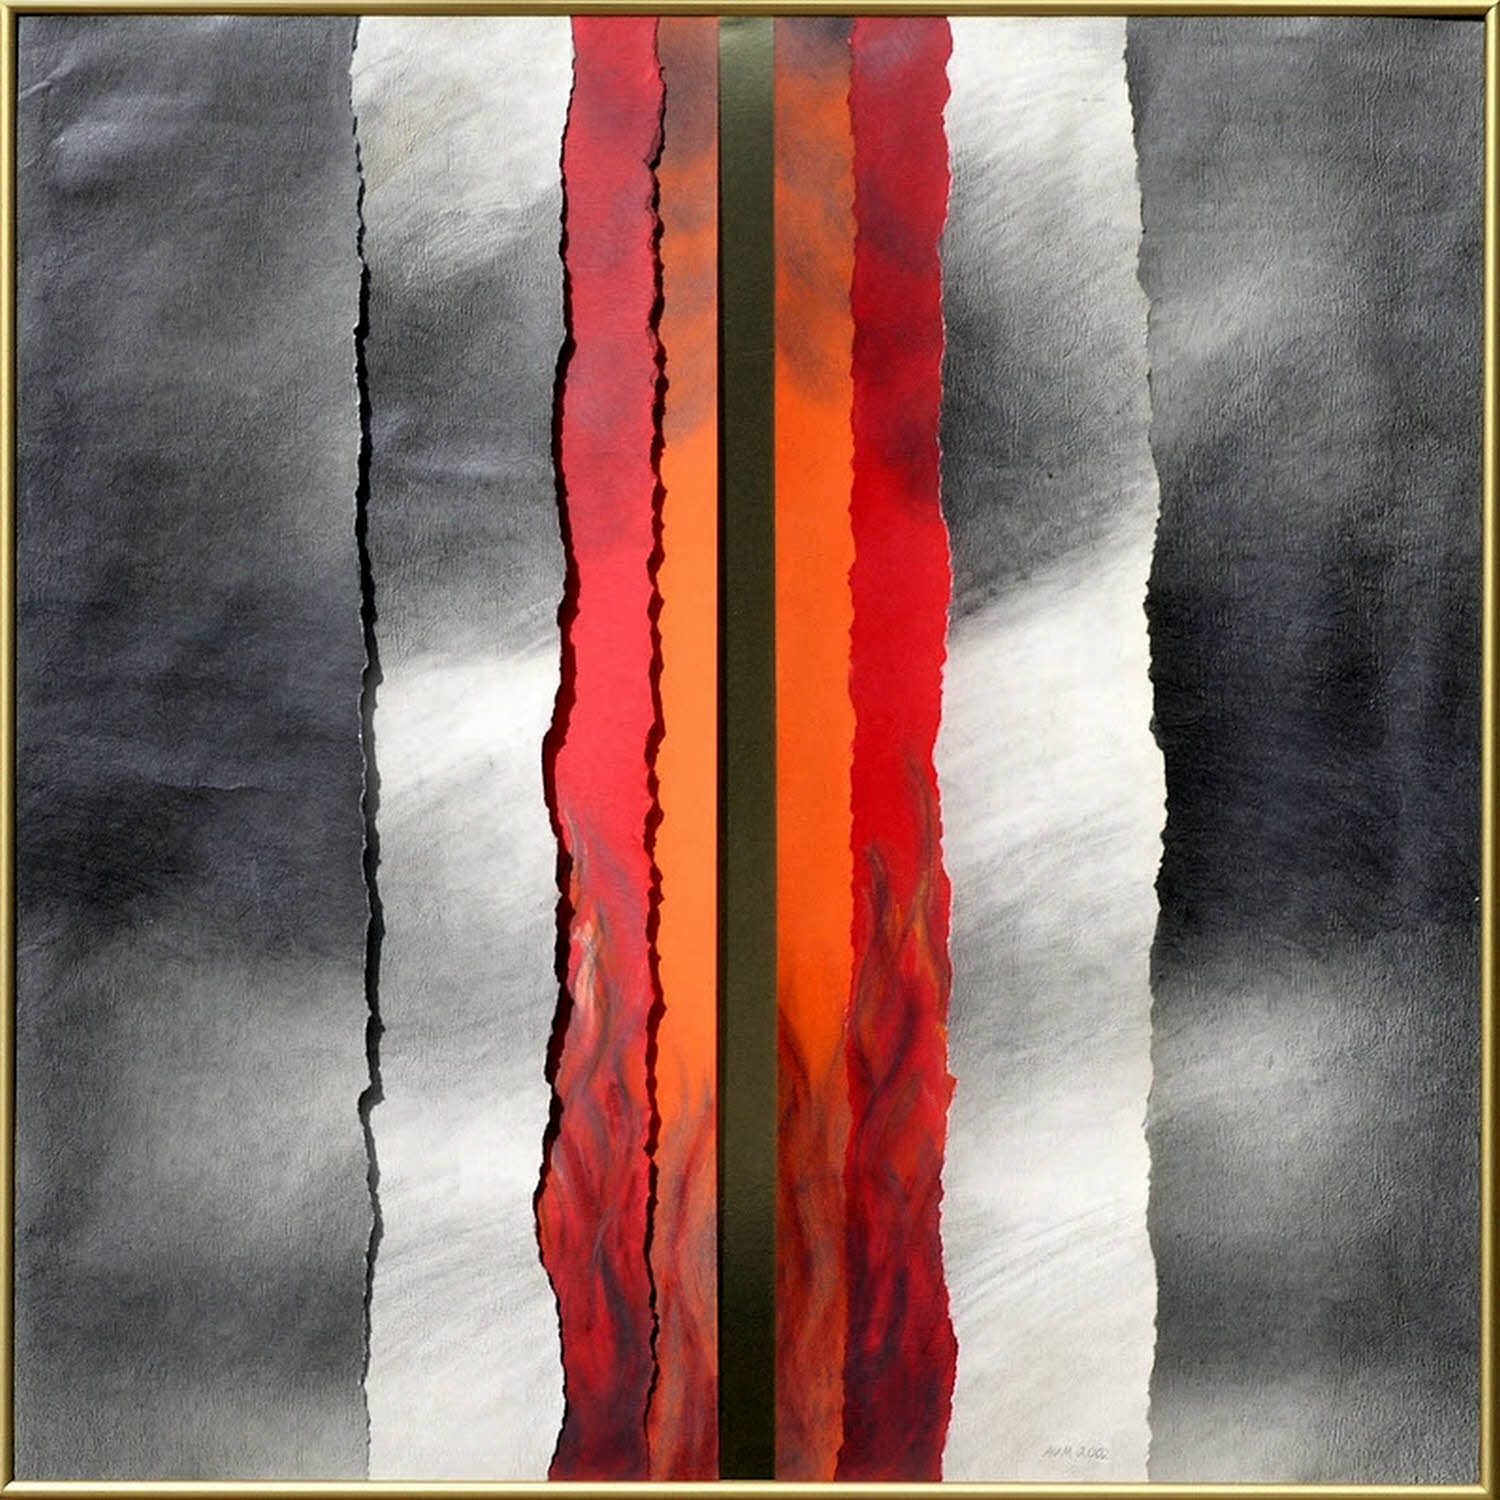 Red Orange Gold, 2002, 2003, graphite on torn paper, collage, 27x27 inches